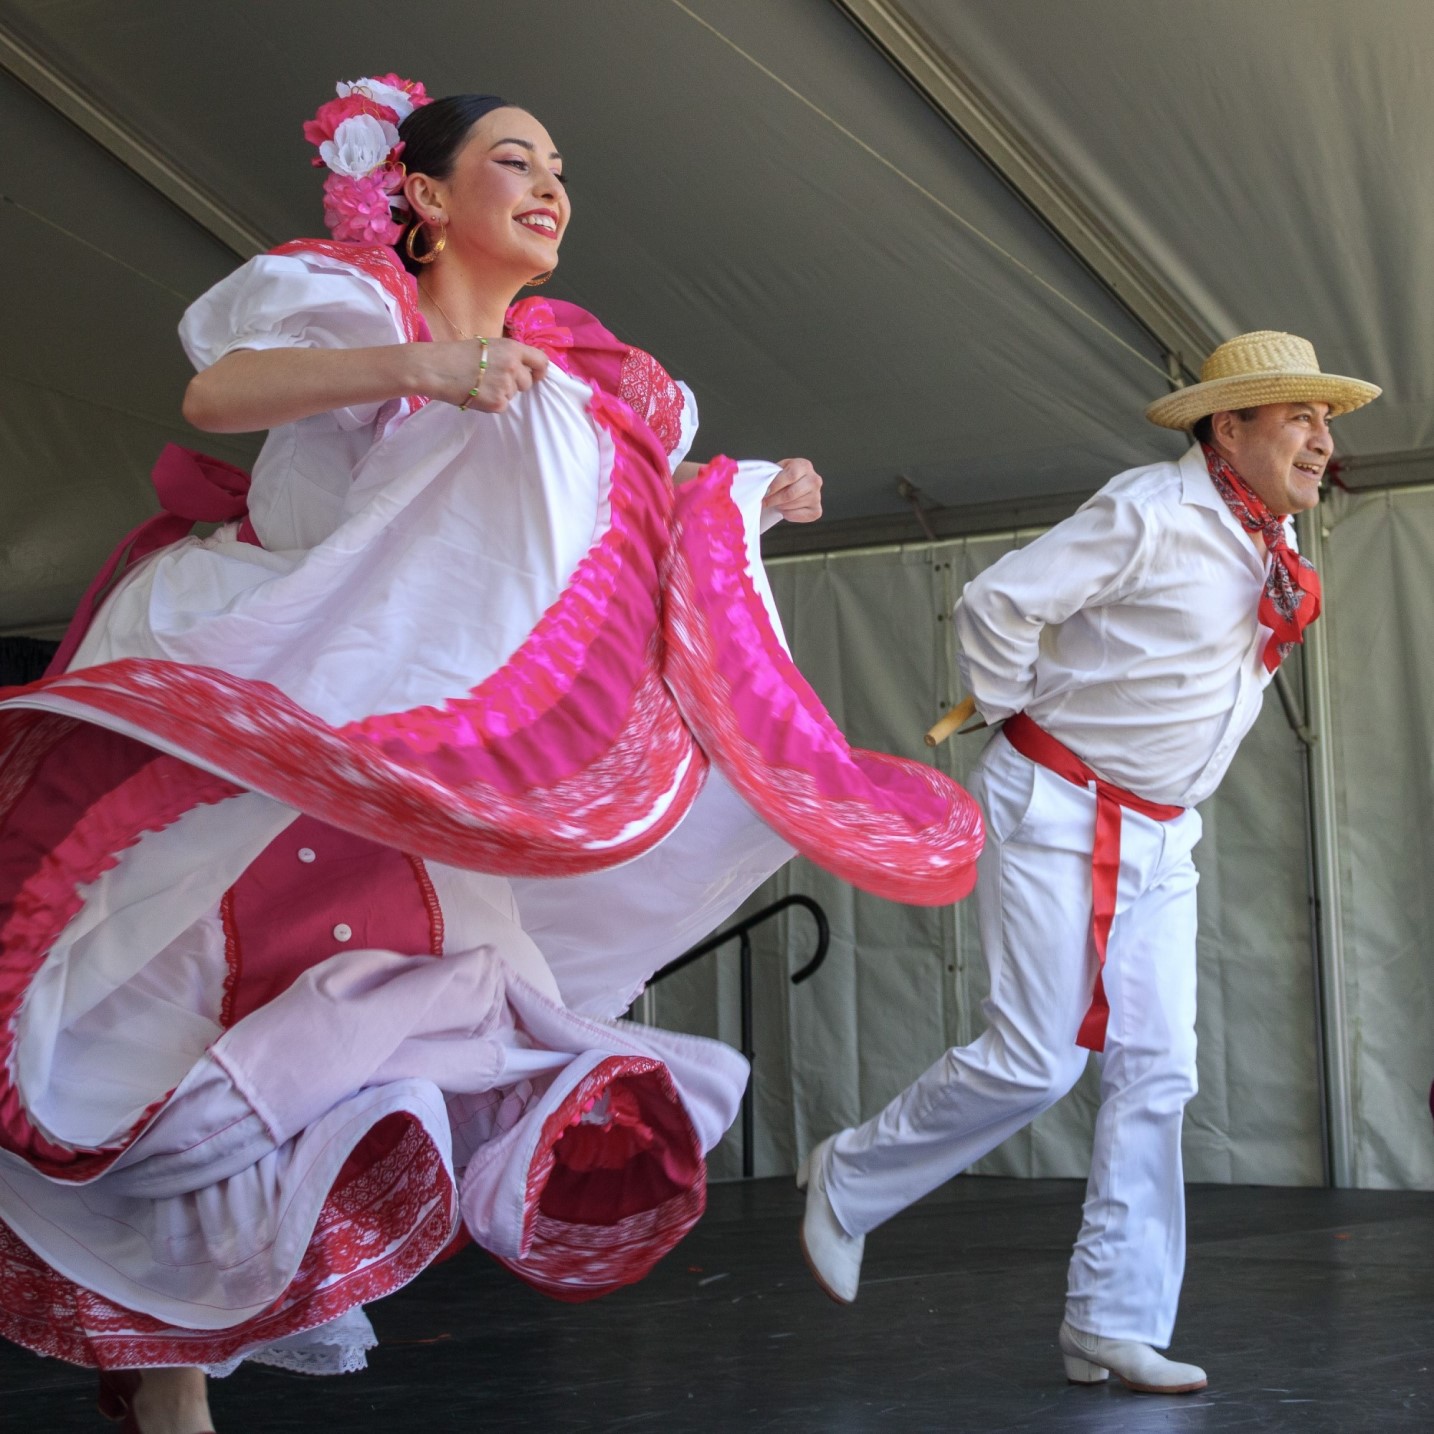 The image depicts a man and woman dancing in a Mexico Vivo Folklore setting. They are dressed in traditional costumes and are engaging in a dance performance. 